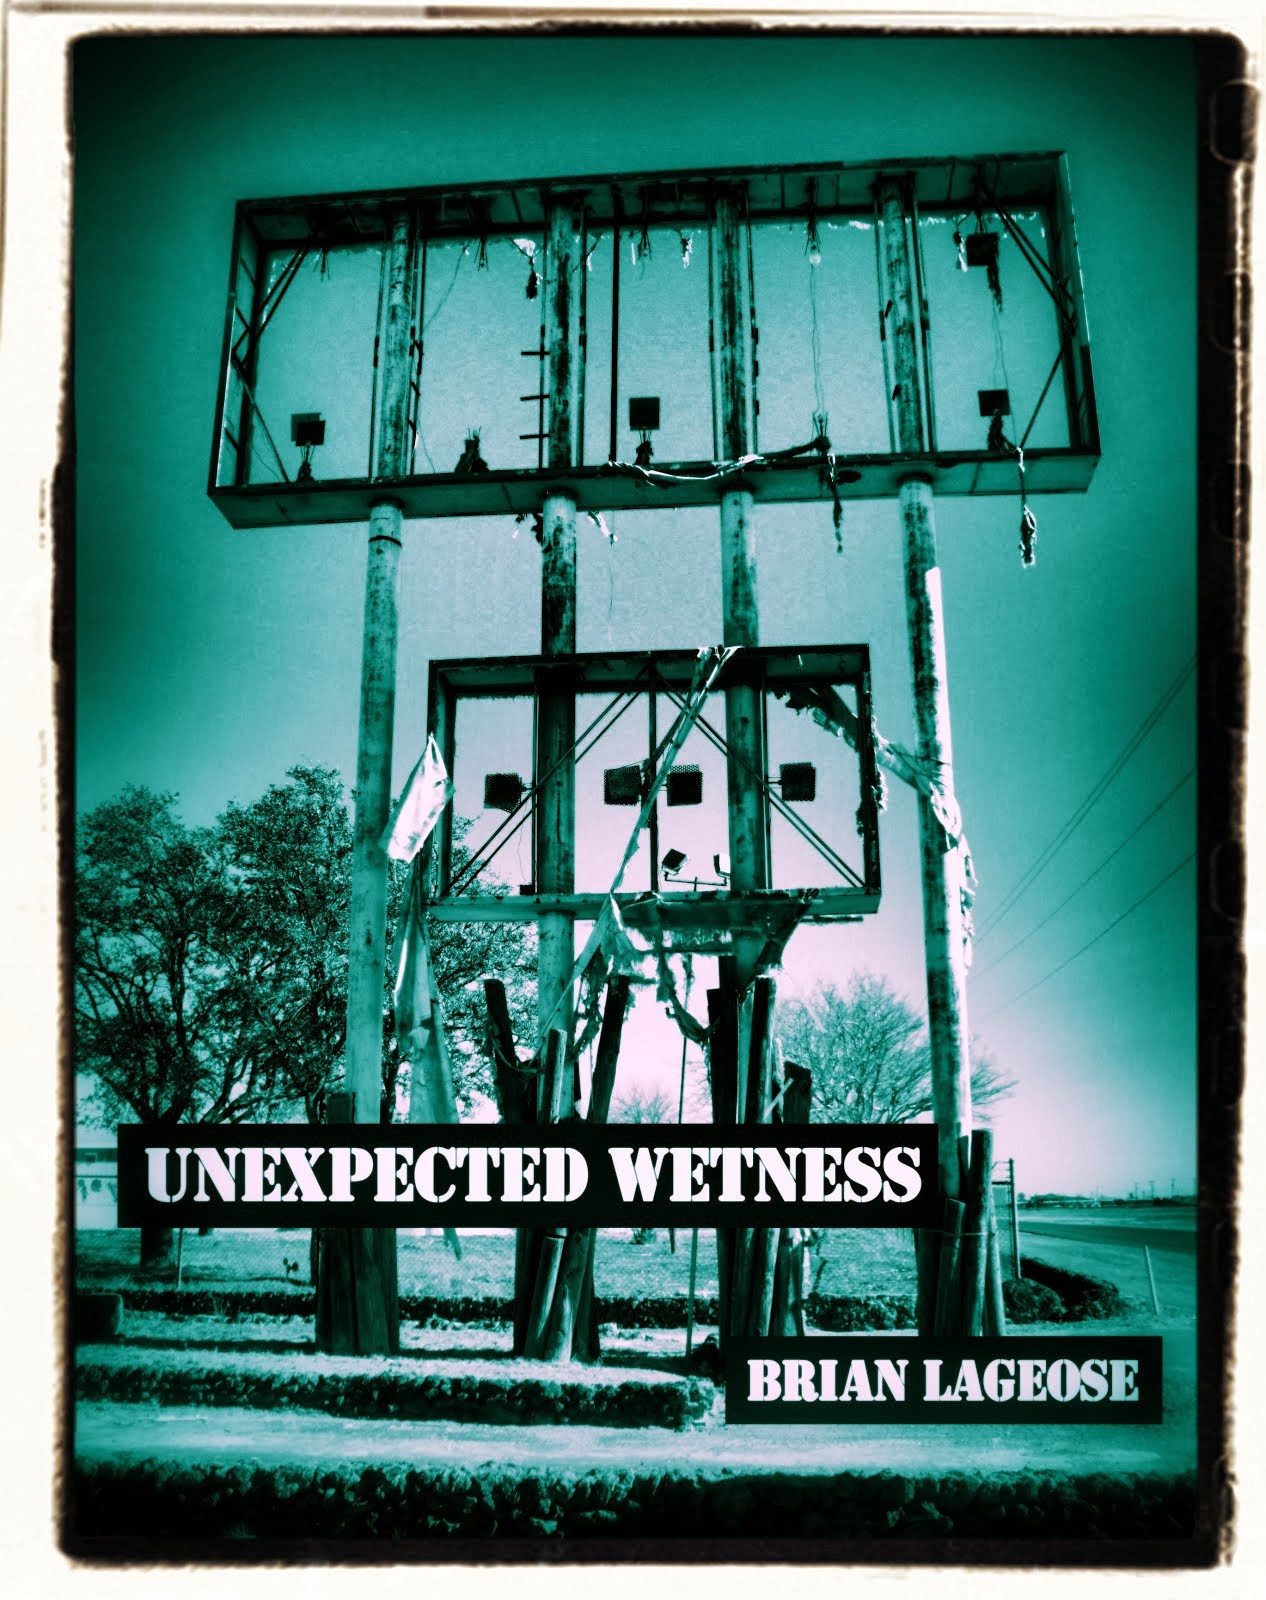 "Unexpected Wetness" Now Available on Amazon. Click for details.